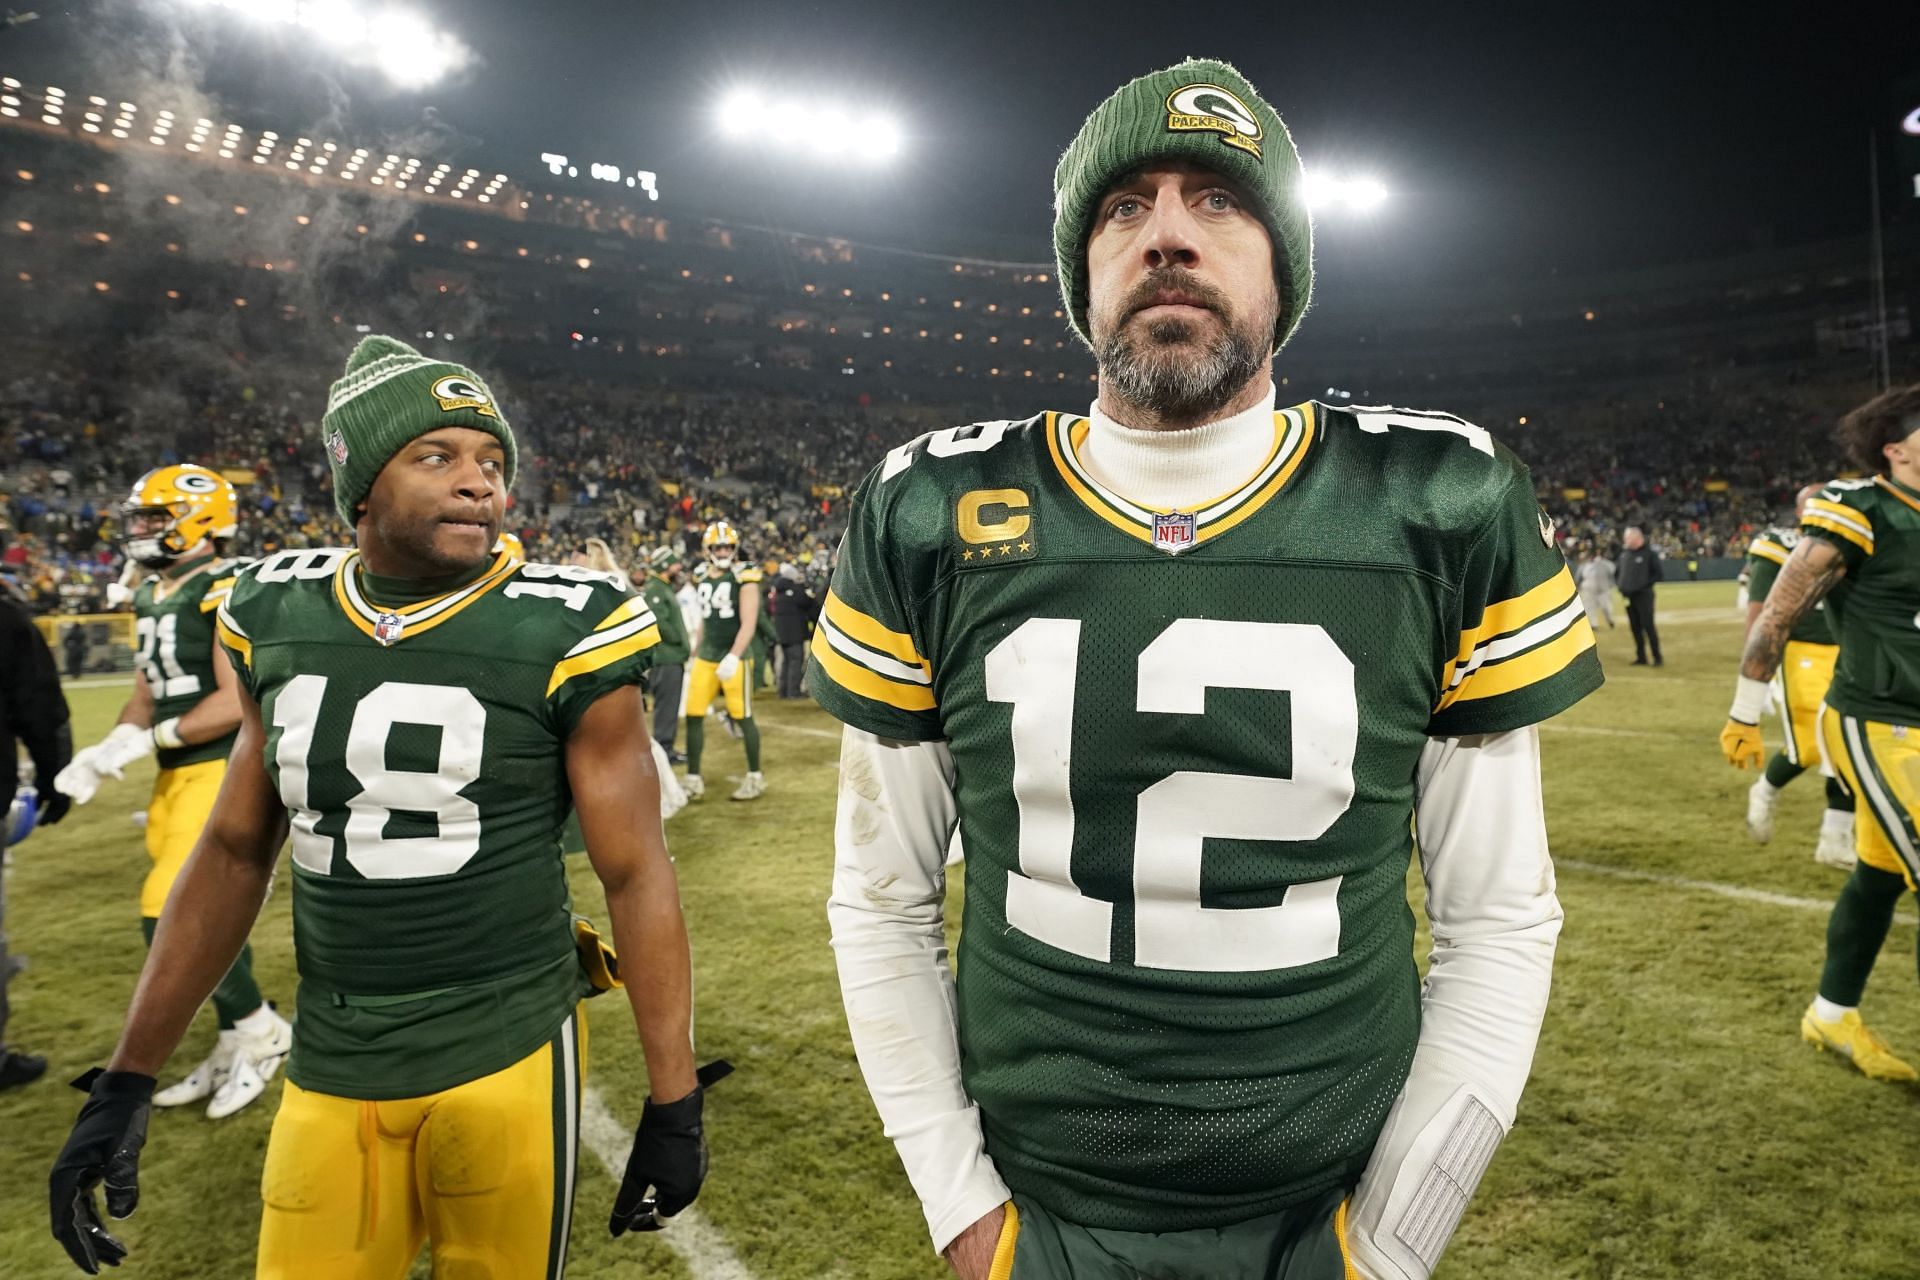 Aaron Rodgers has not decided yet